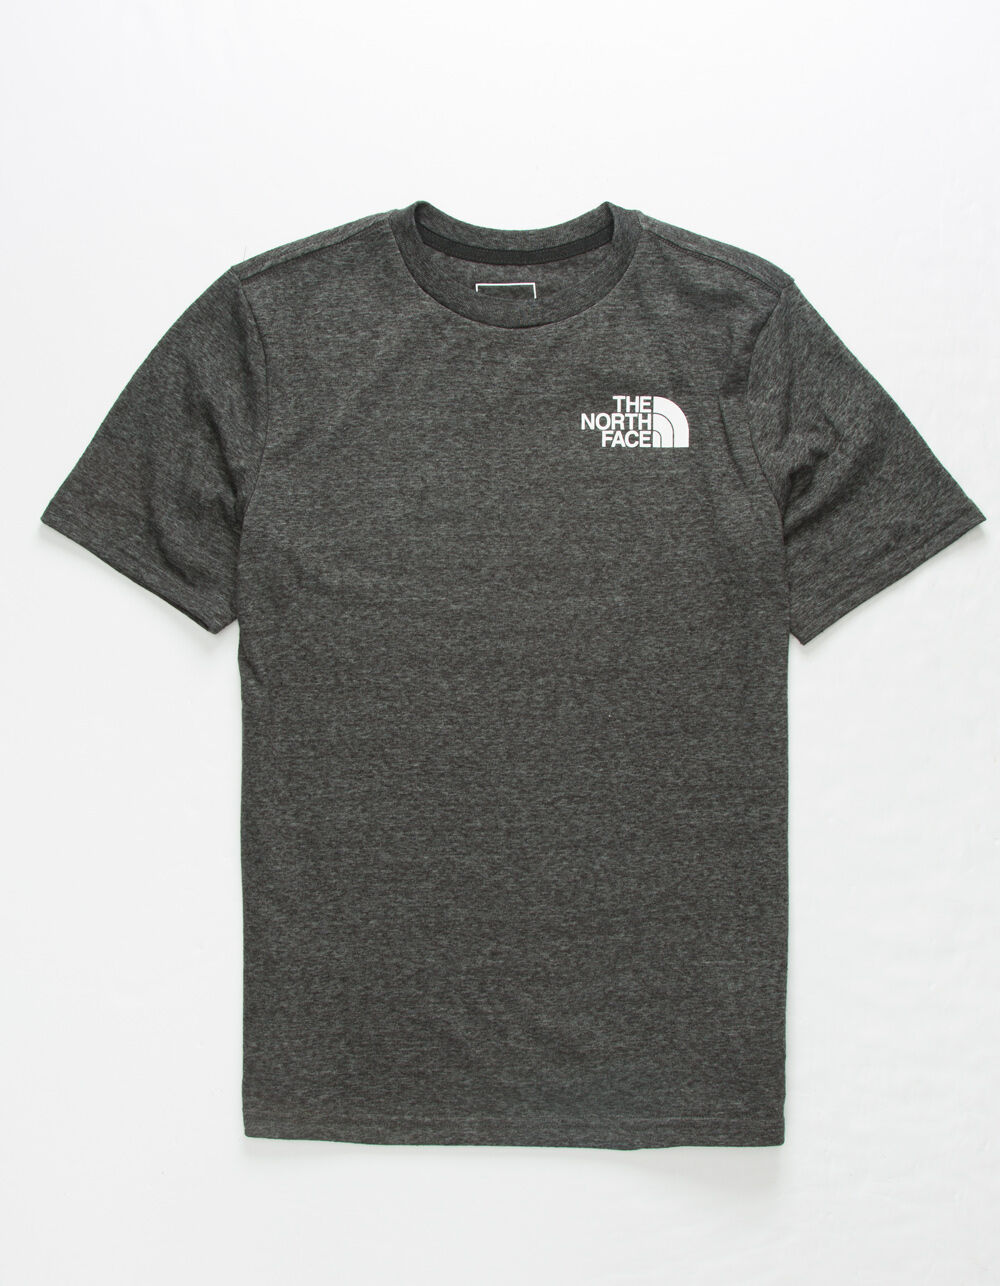 THE NORTH FACE Red Box Boys T-Shirt - HTHR BLK | Tillys